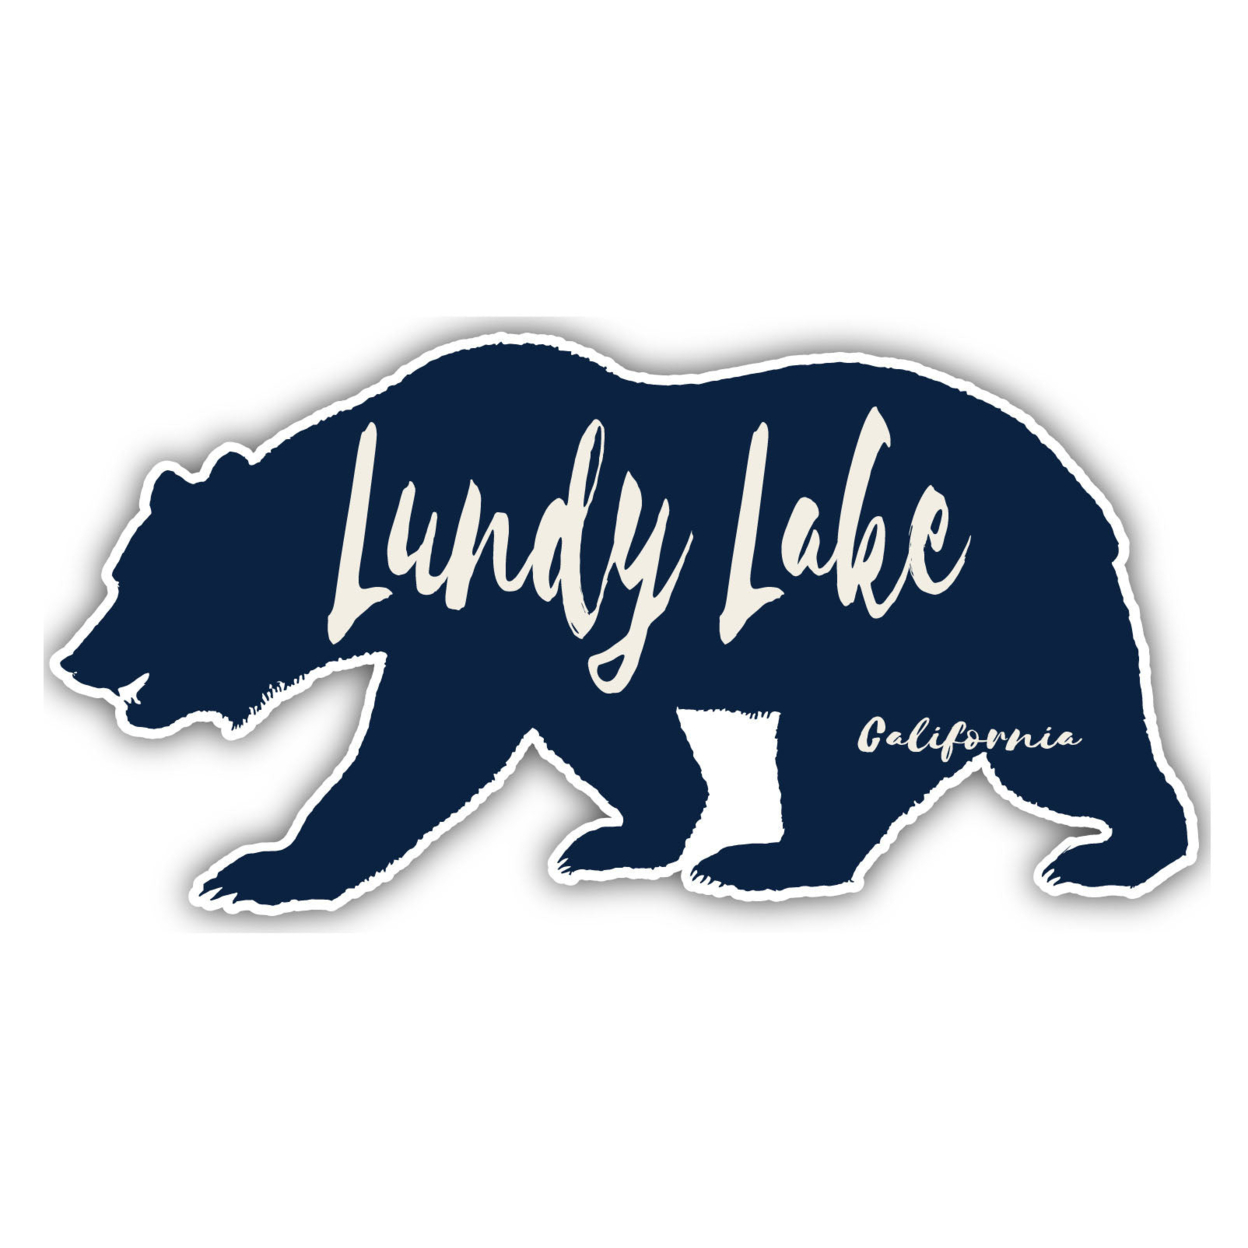 Lundy Lake California Souvenir Decorative Stickers (Choose Theme And Size) - 4-Inch, Tent